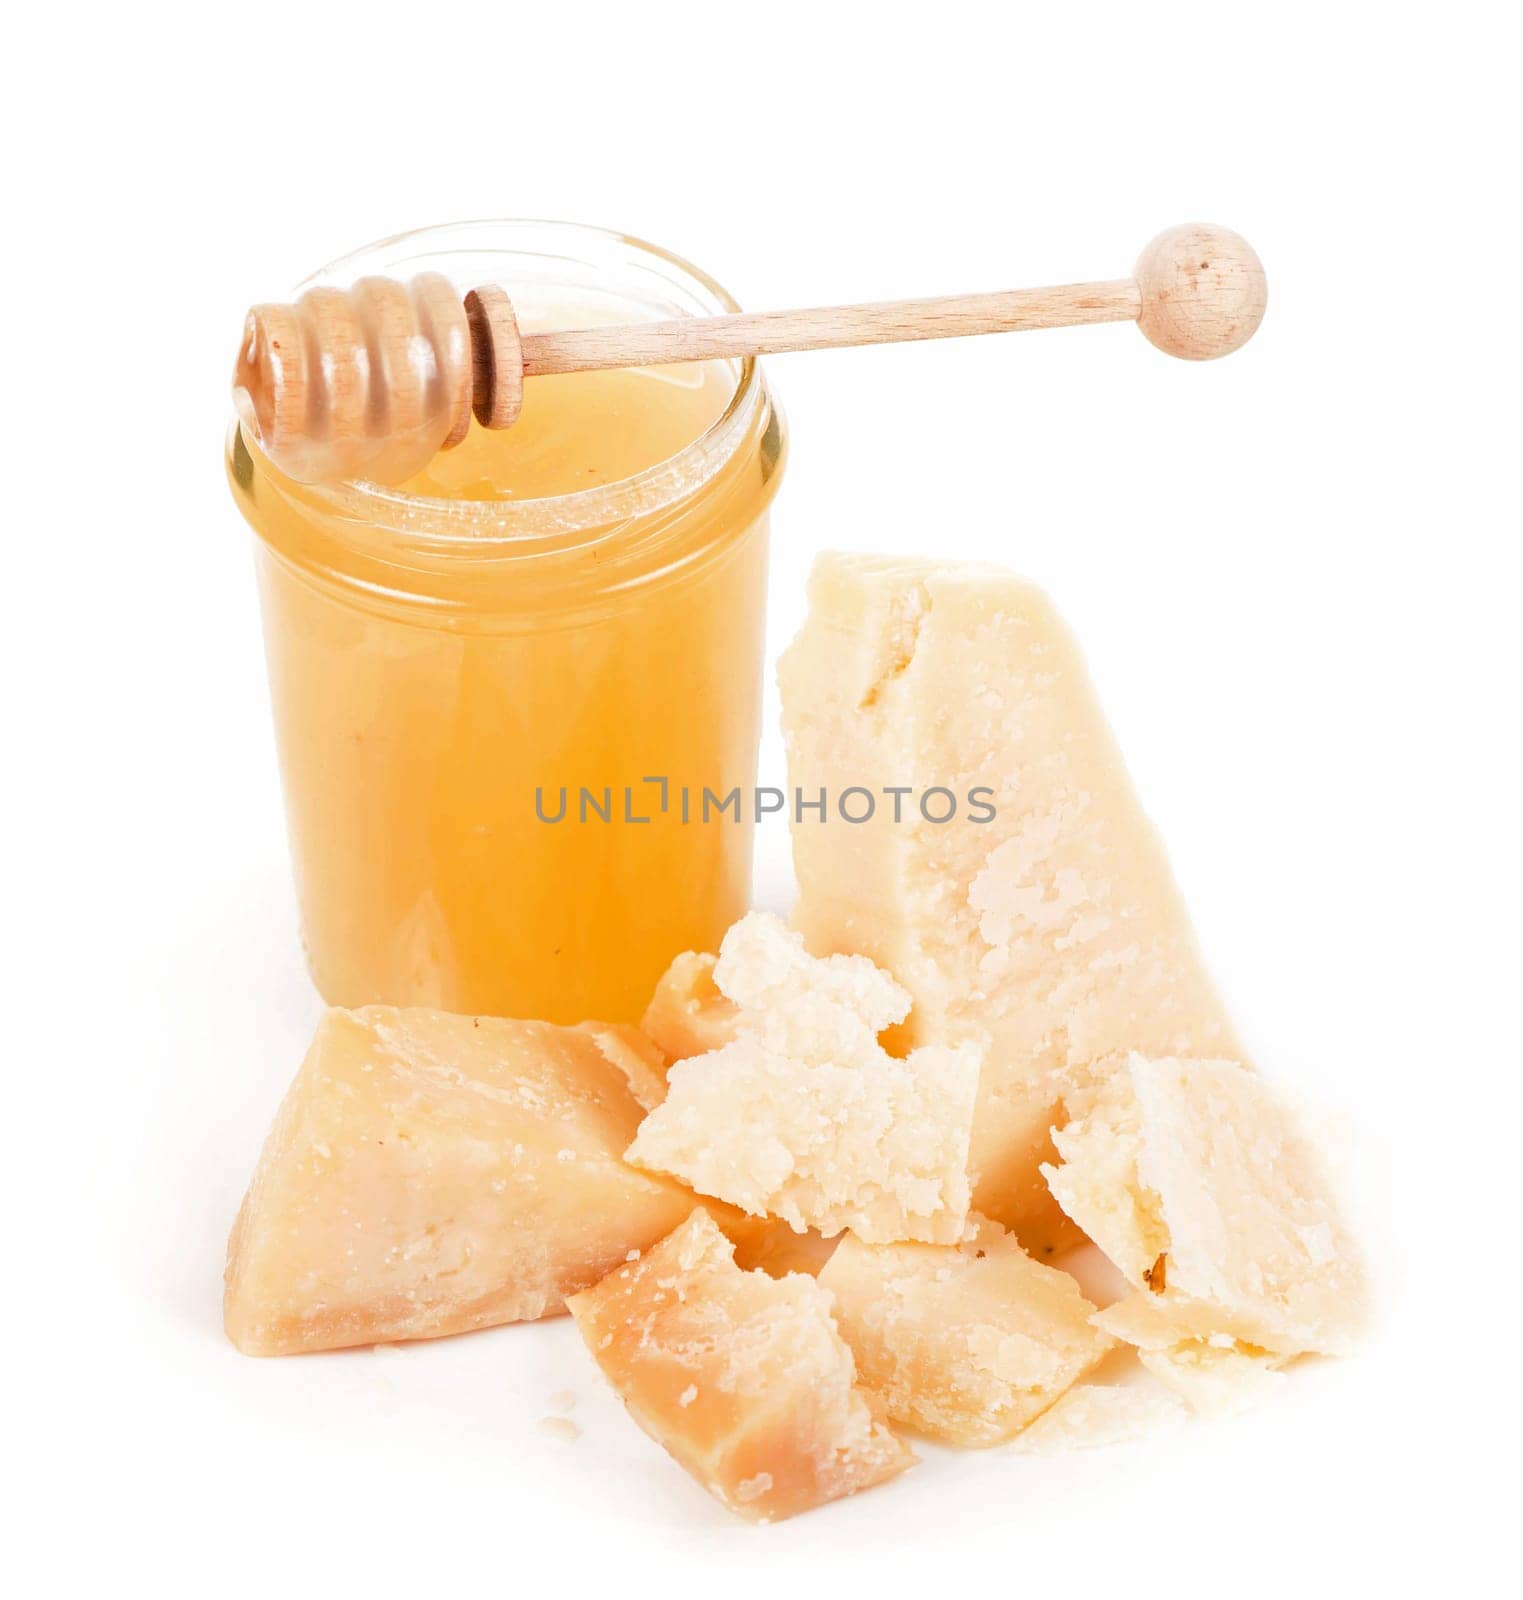 honey and prmesan isolated on the white background. honey Jar and barrel with a dripping drop of honey. Honey tasting set. still life studio photo by aprilphoto